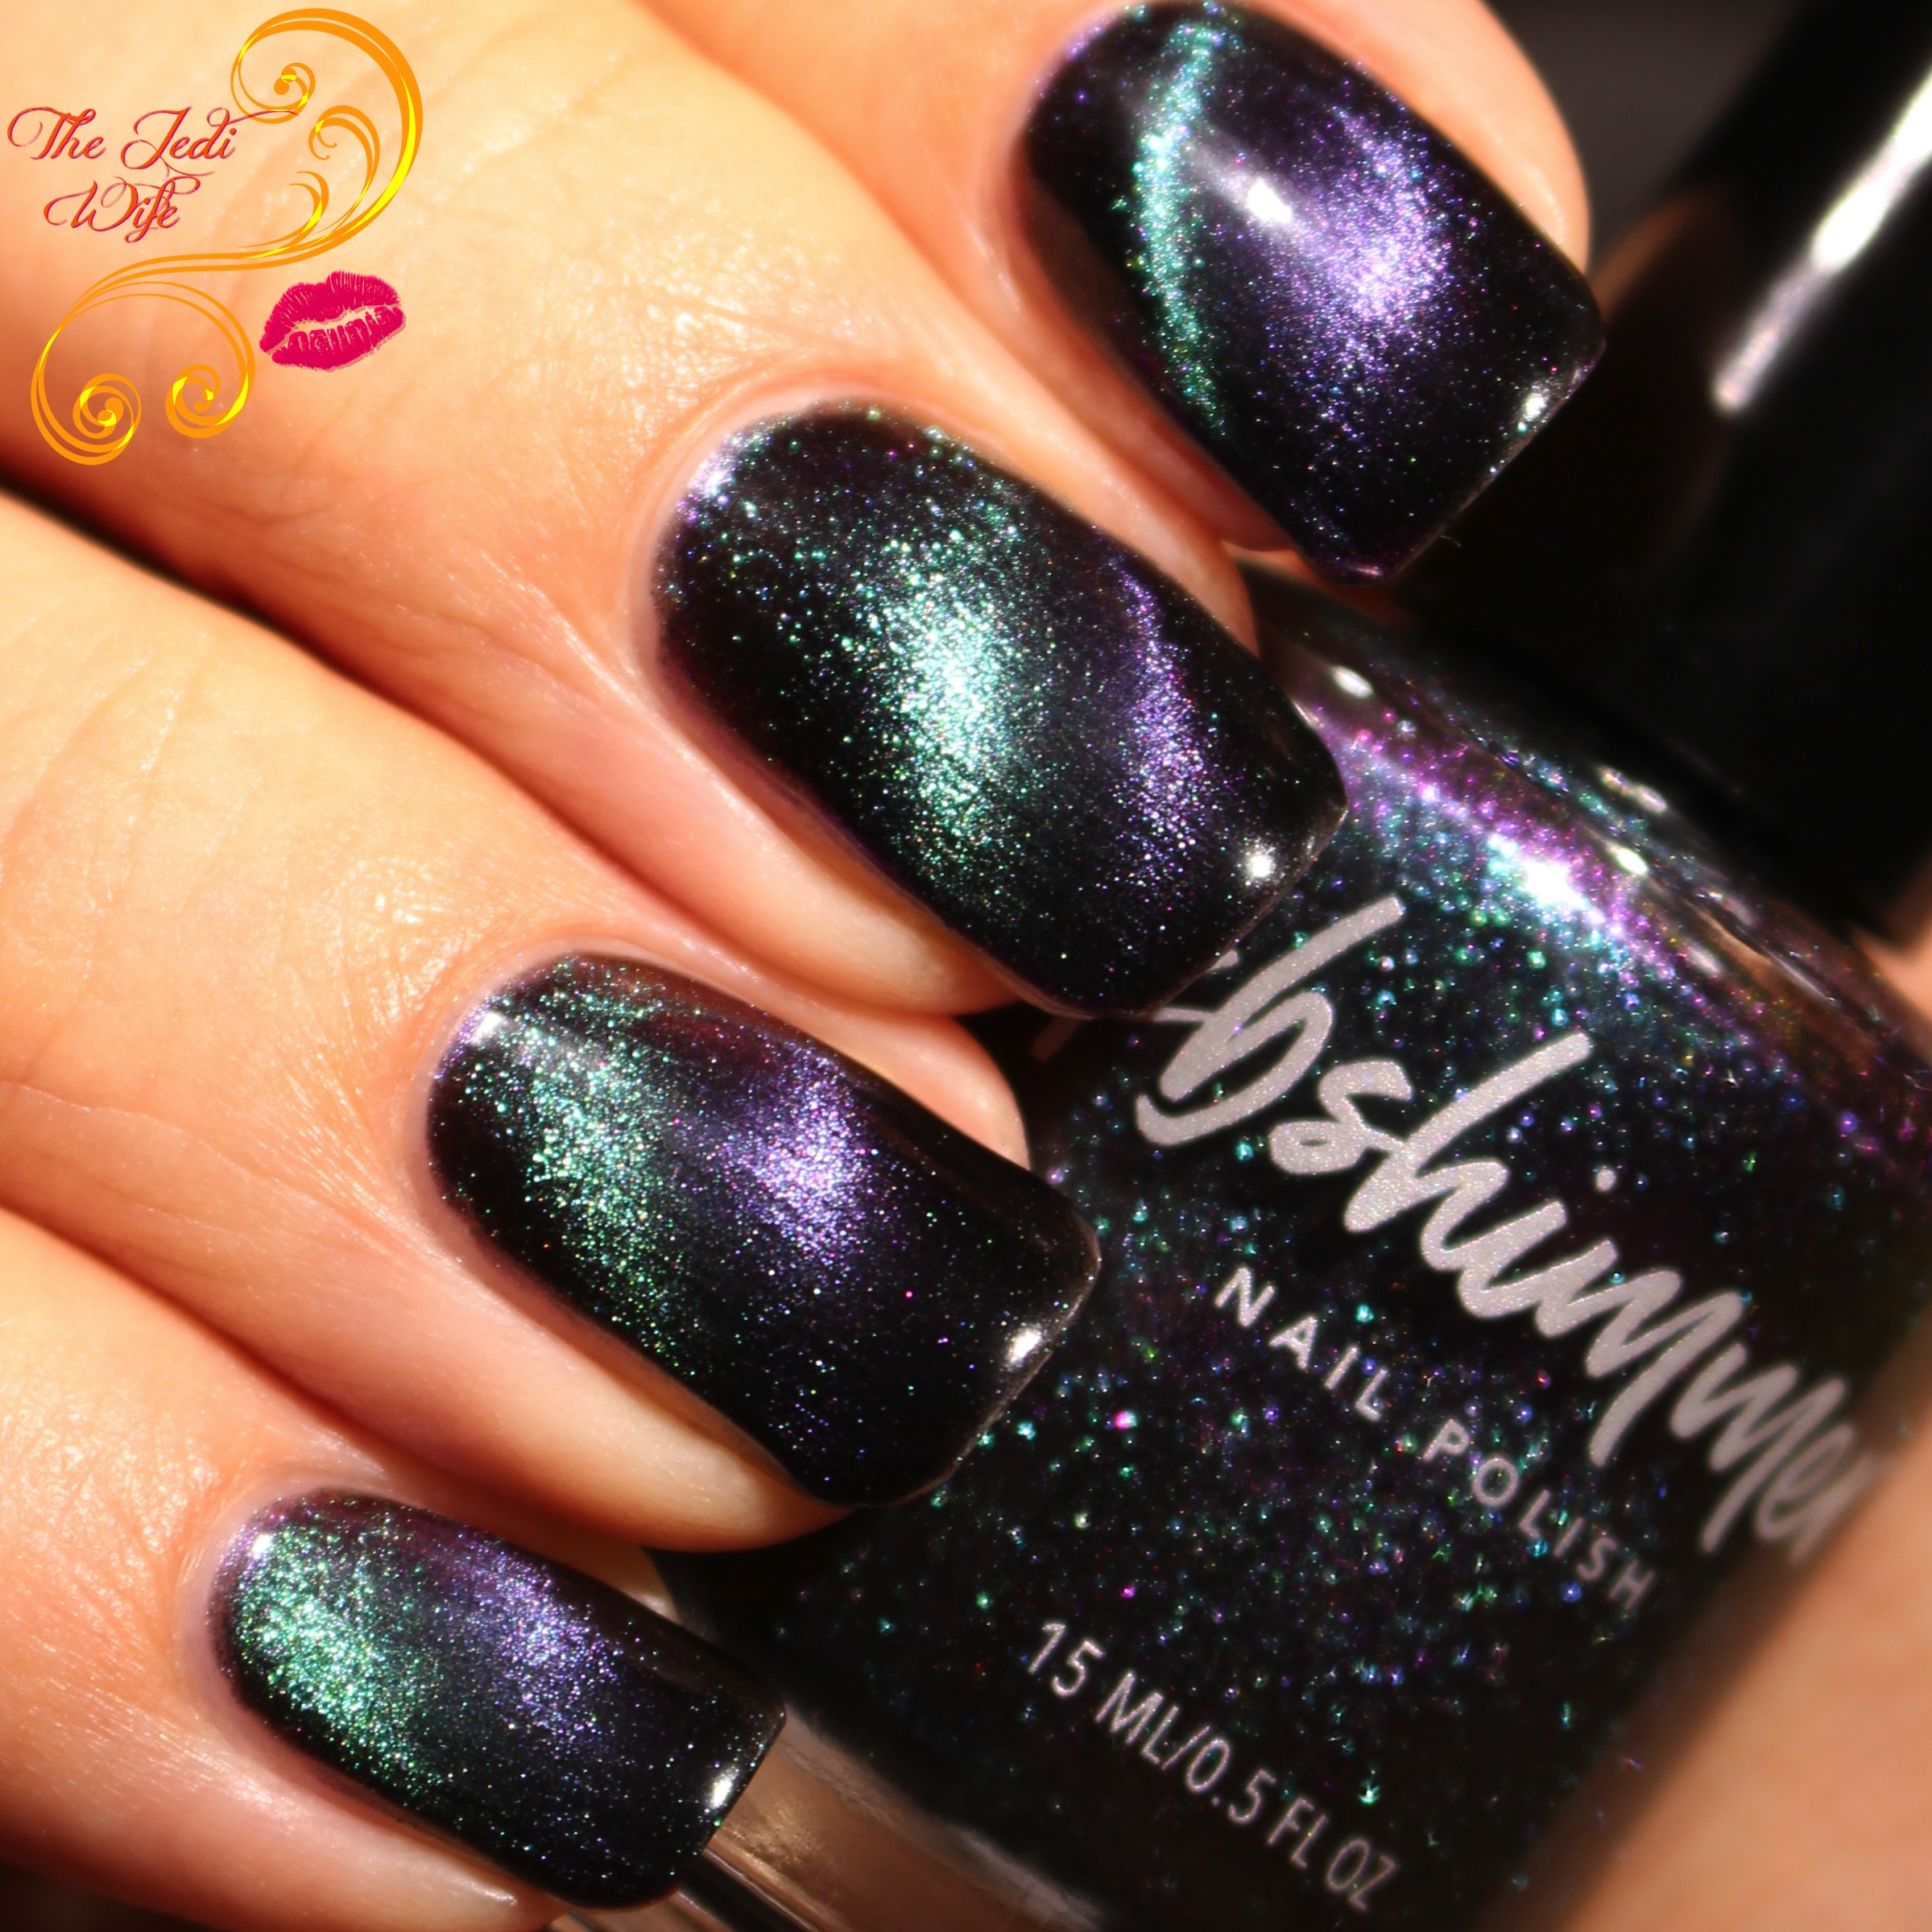 KBShimmer Spaced Out Multichrome Magnetic Nail Polish